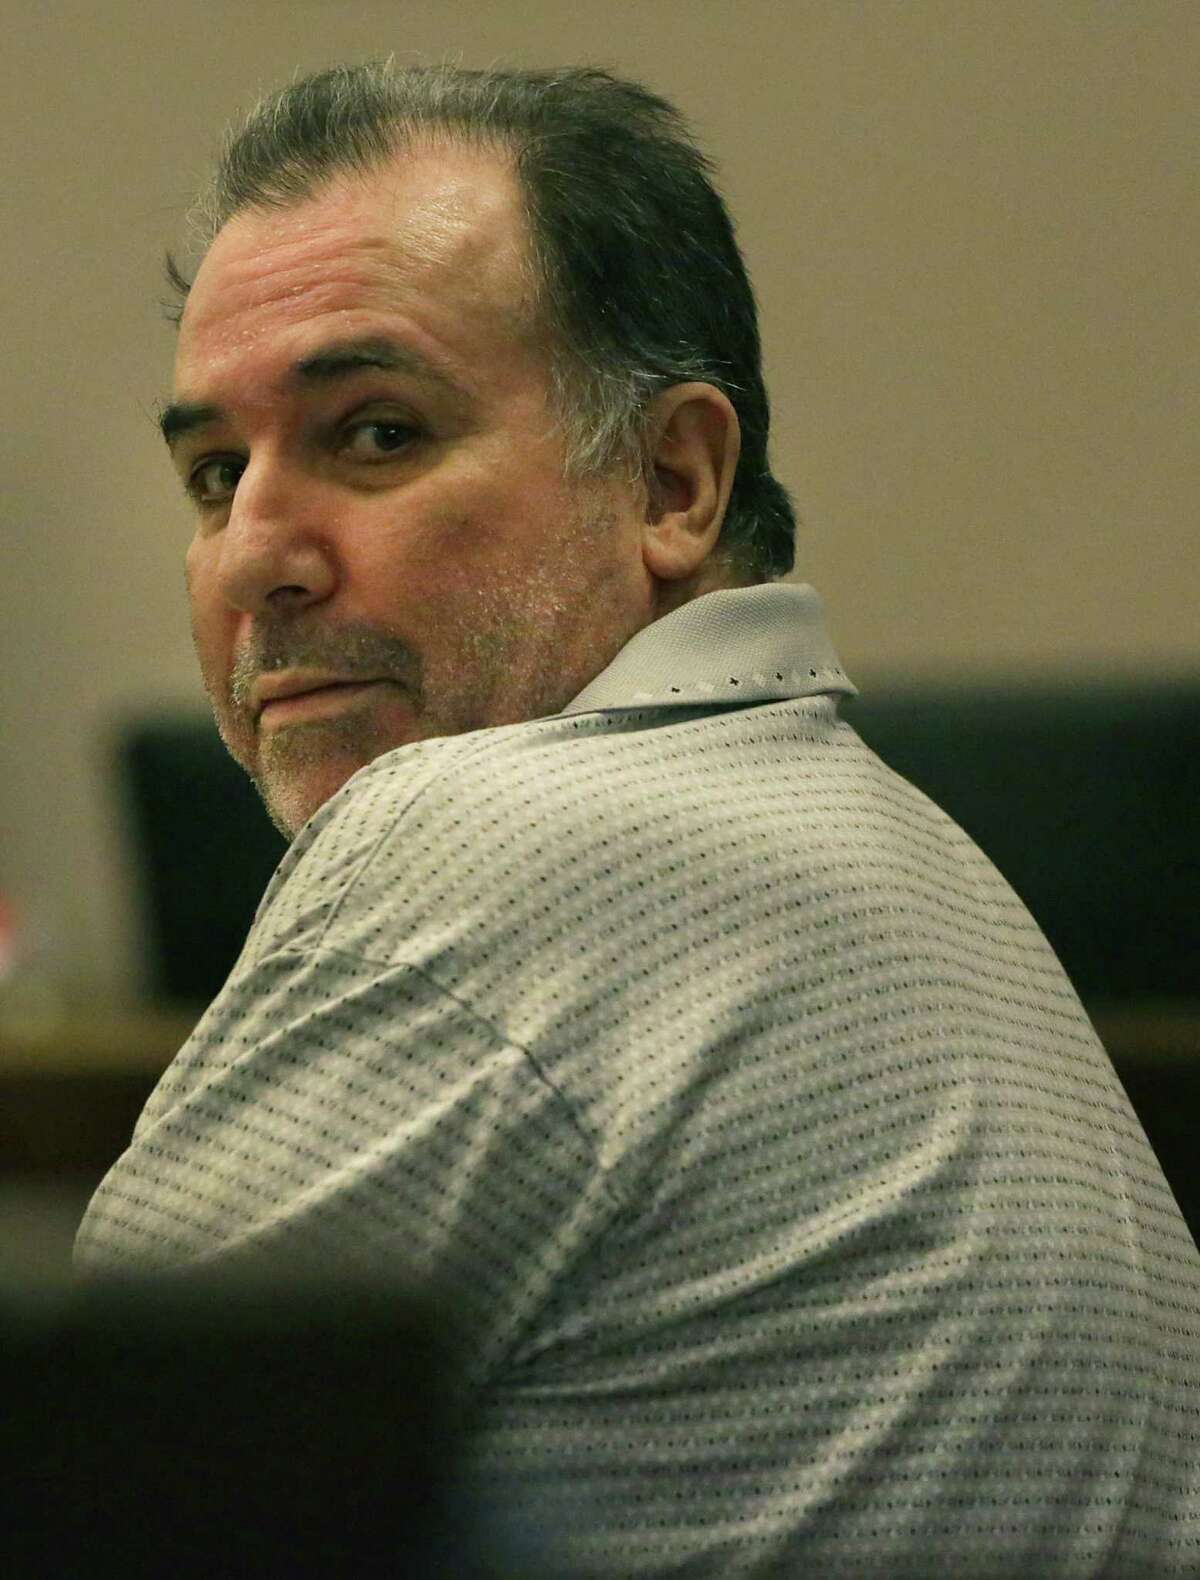 David Loven sits in the 186th District Court on trial for child molestation, on Wednesday, June 5.